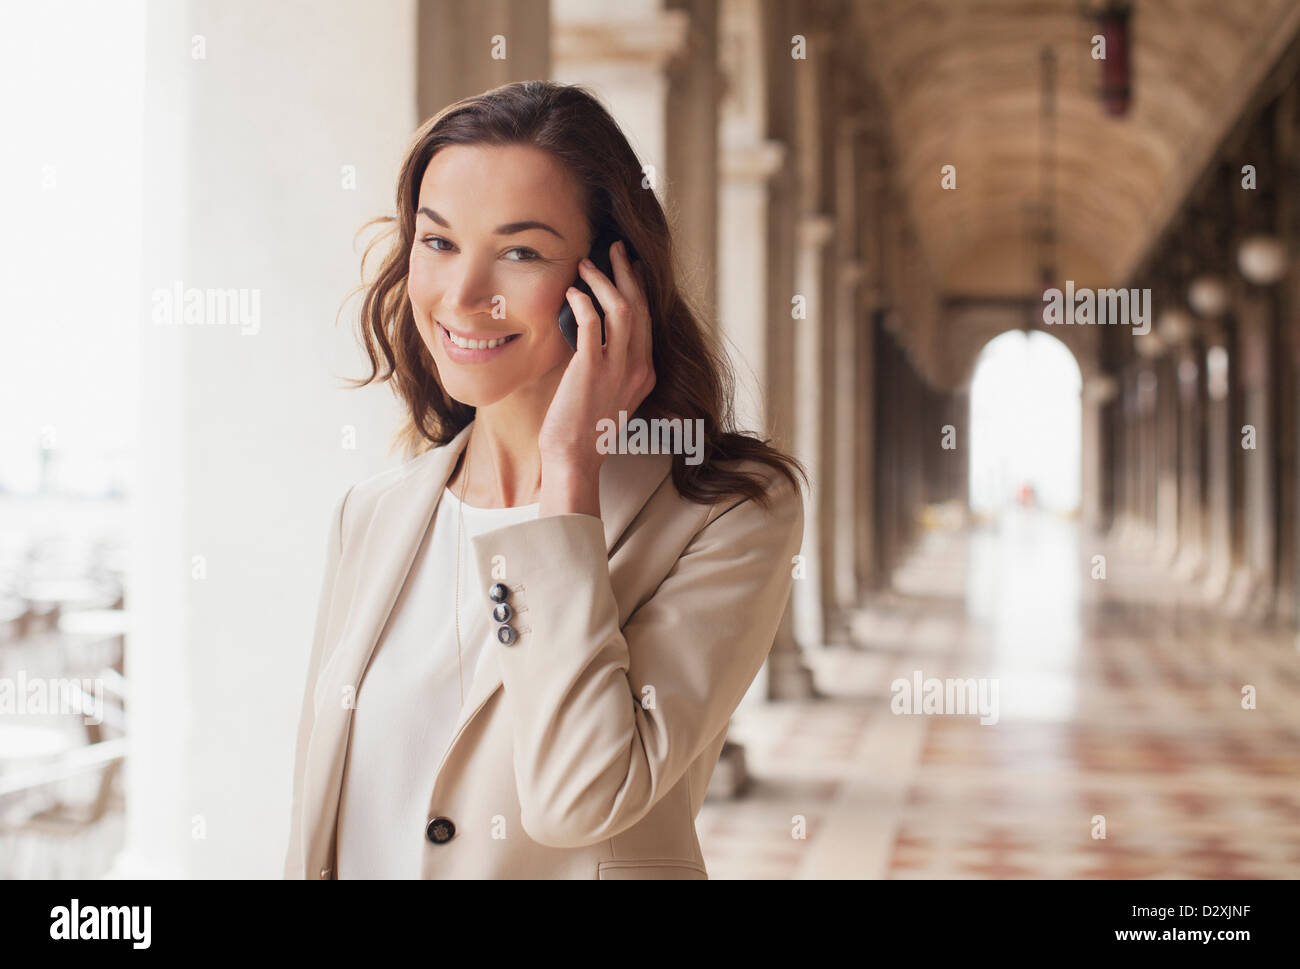 Portrait of smiling businesswoman talking on cell phone in corridor Banque D'Images